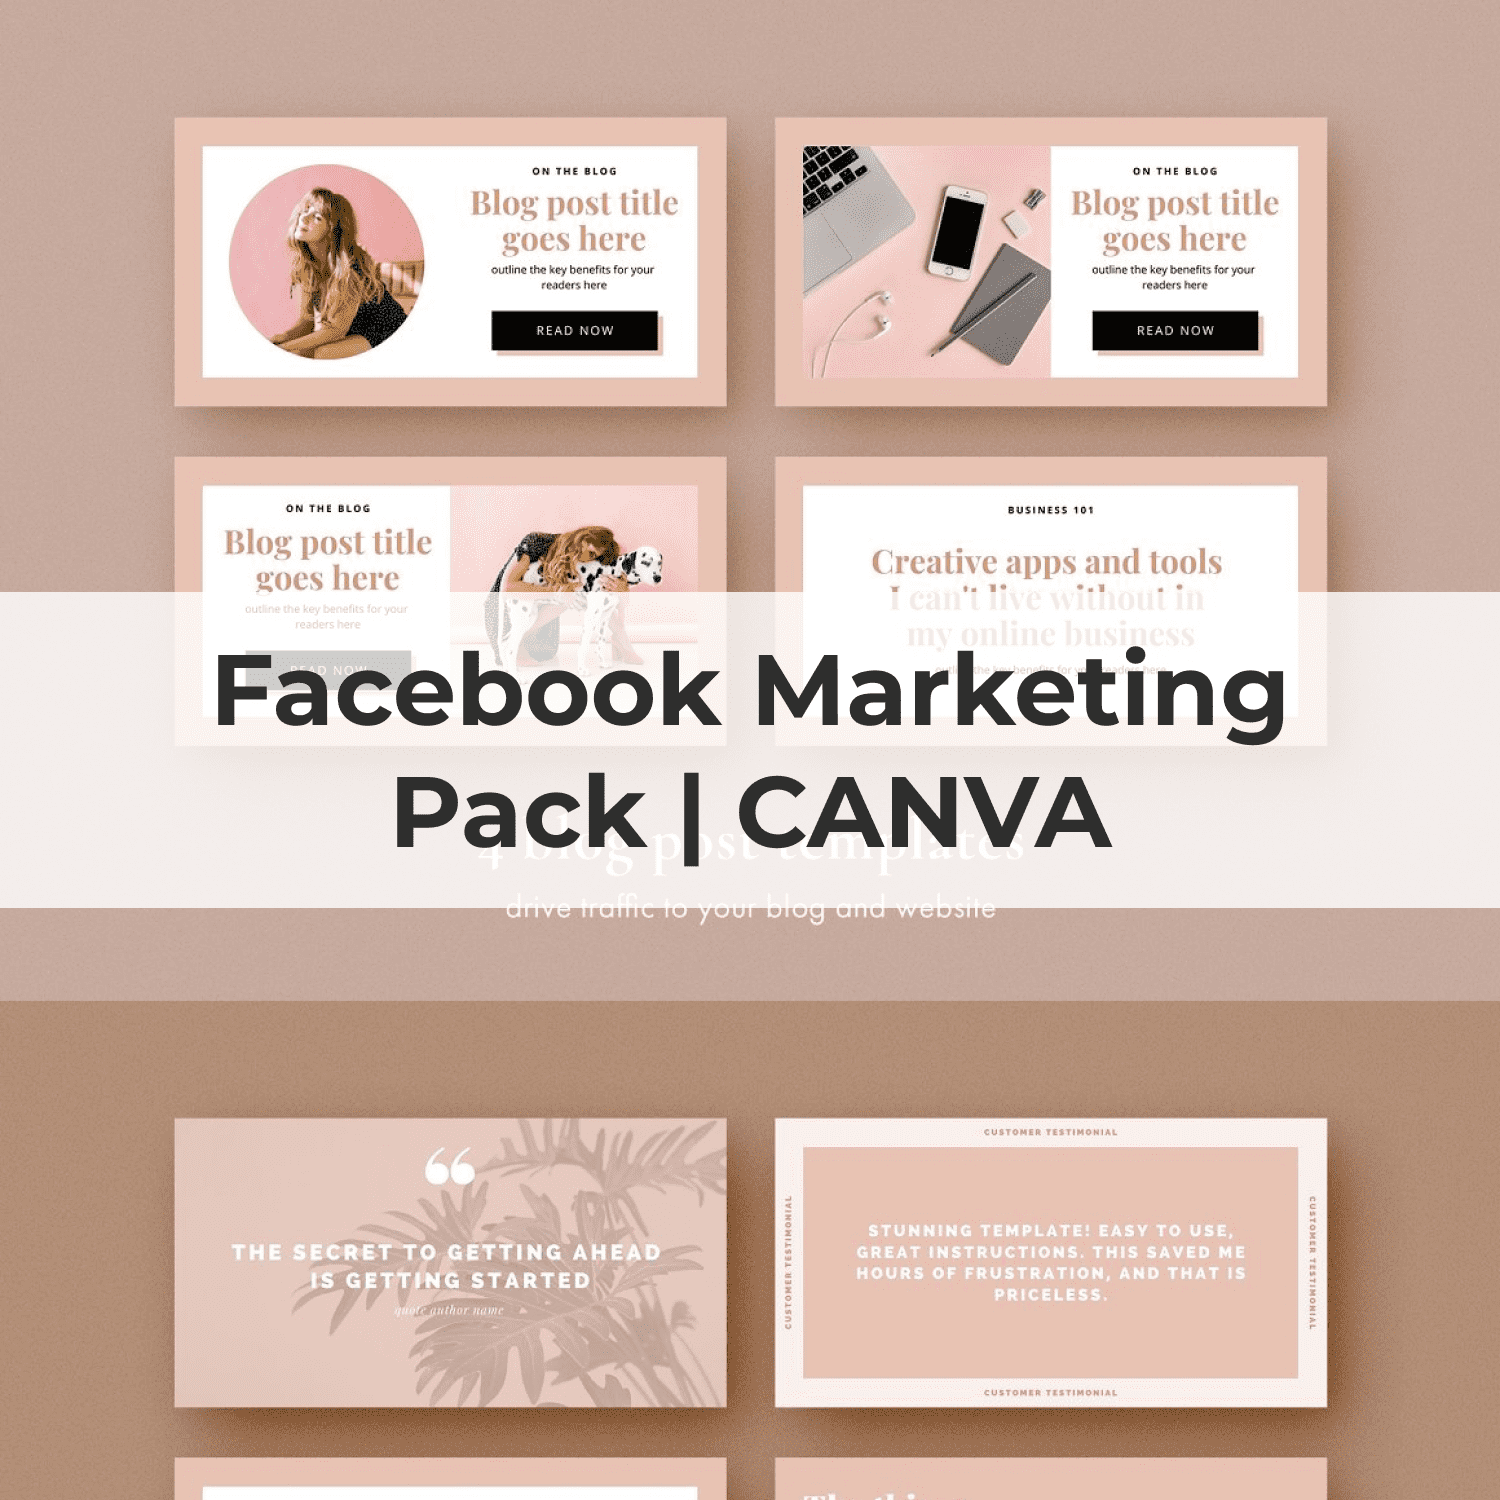 Facebook Marketing Pack | CANVA main cover.